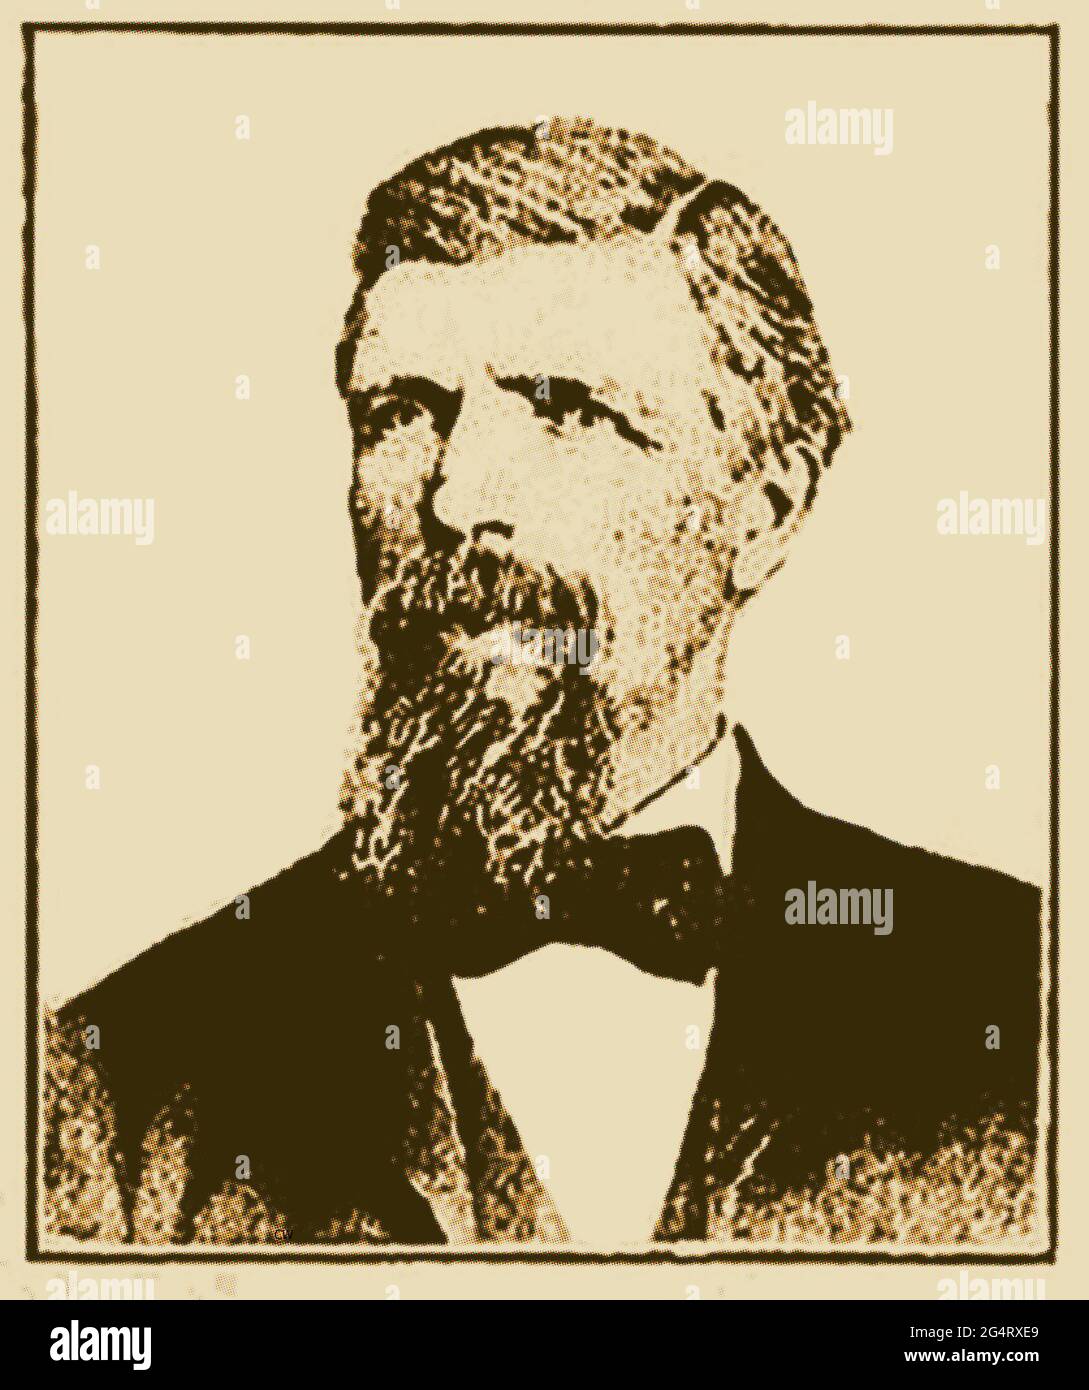 An 1898 printed photograph of James Hutchinson Funk (1842-1923), Speaker of the Iowa House of Representatives, USA ----   He was married to Elizabeth Gibson who died in 1865. After  farming his property he began practising  law in 1871 and the following year entered politics as a prosecuting  & city attorney. He served two terms as a member of the Illinois legislature. Ill health forced a move to Iowa Falls, Hardin county, ( in 1890 farming & horse breeding) before taking up law again. He was also mayor of Iowa Falls & was author of the Mulct Law Measure Stock Photo